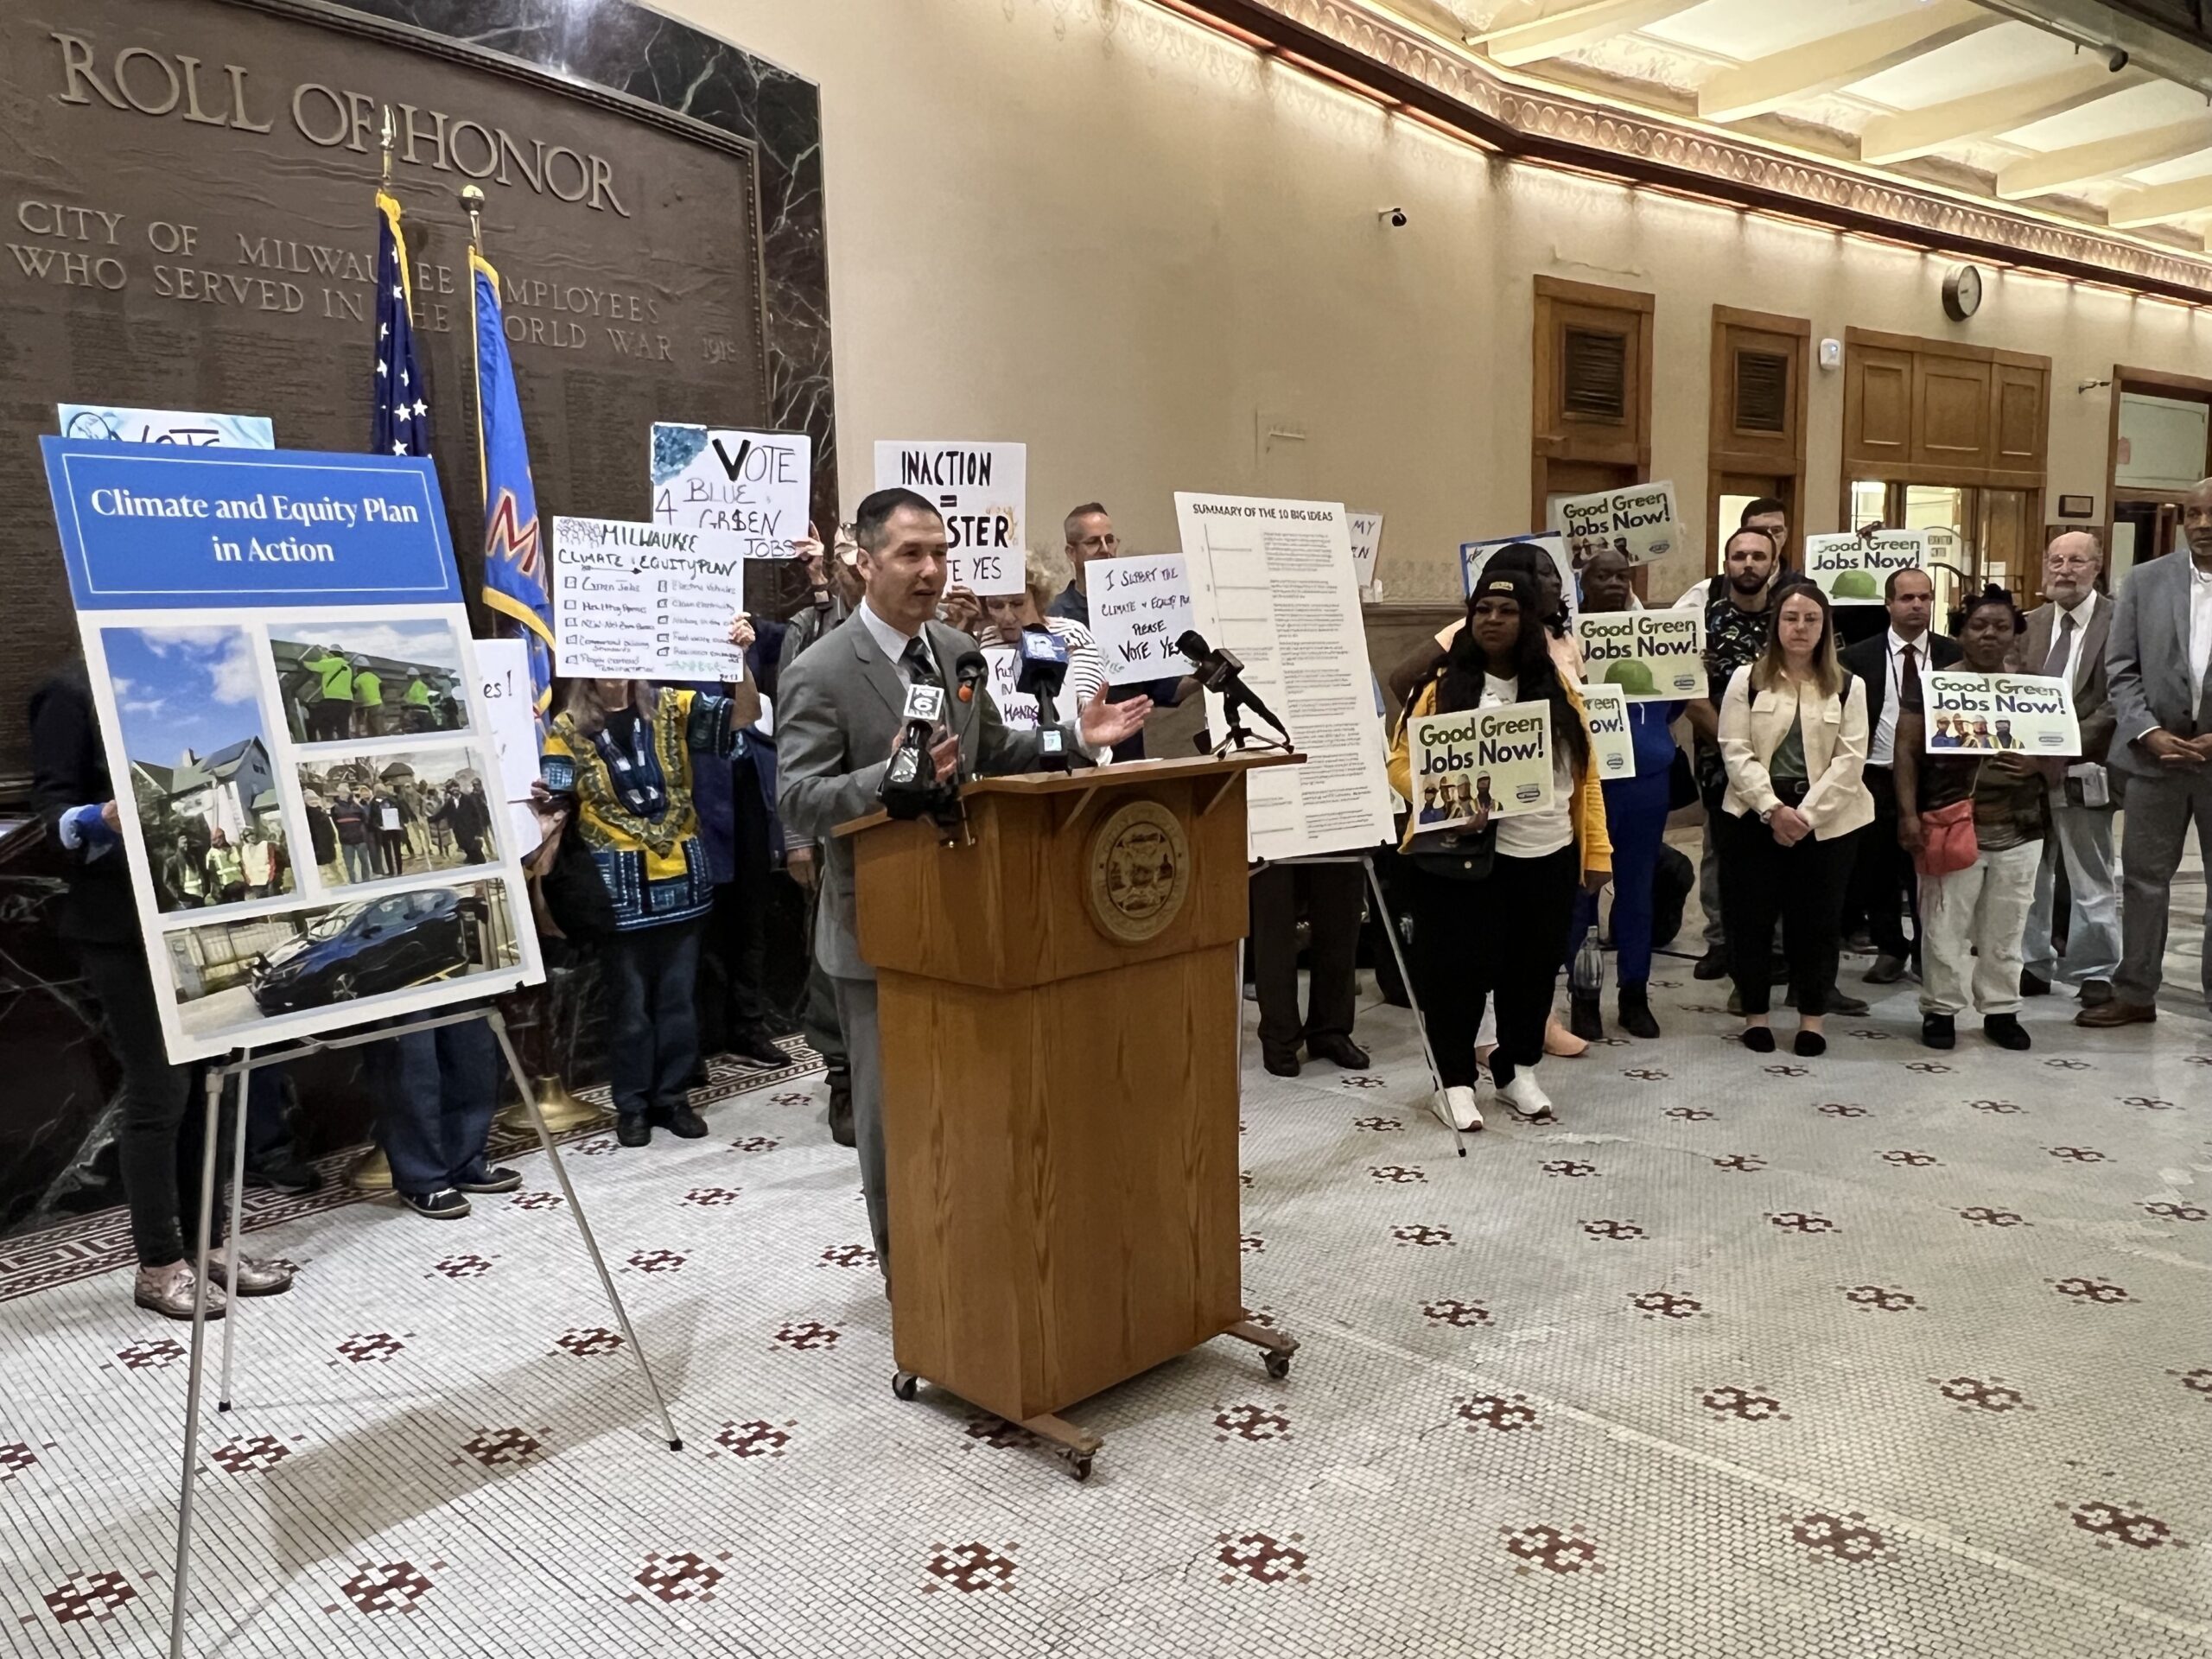 ‘We cannot wait any longer’: Milwaukee close to adopting climate and equity plan